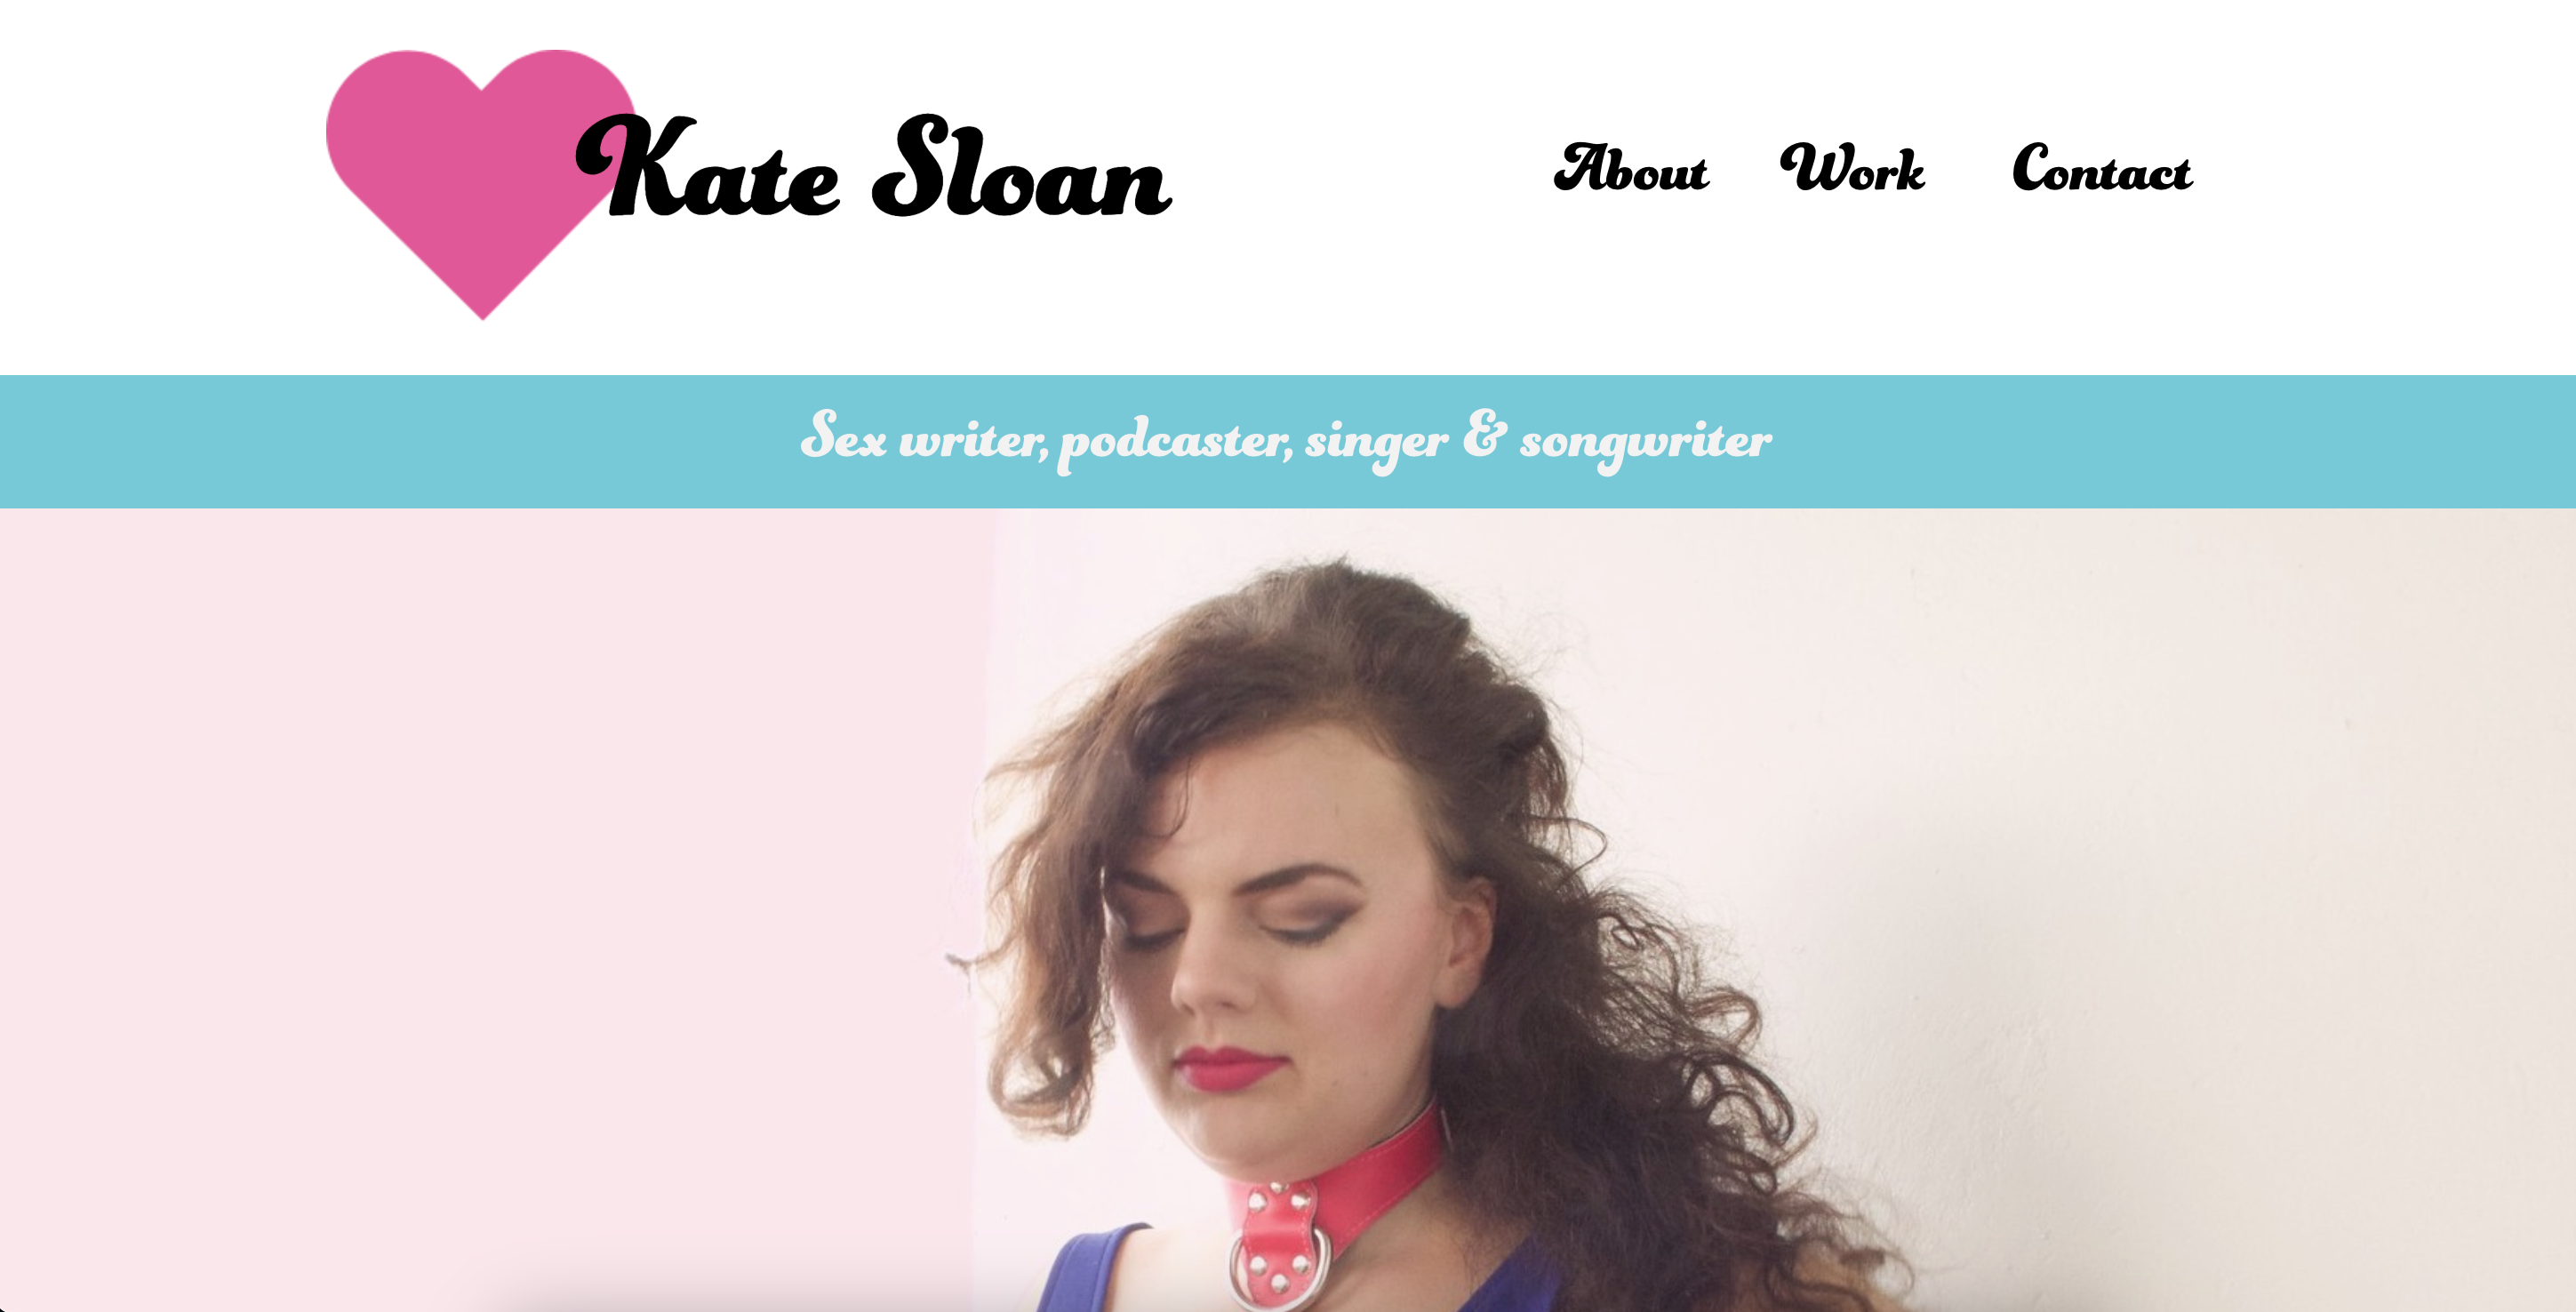 Screenshot of Kate Sloan's website home page. The image shows Kate, with long curly hair, looking down demurely and wearing a pink collar and a purple tank top.